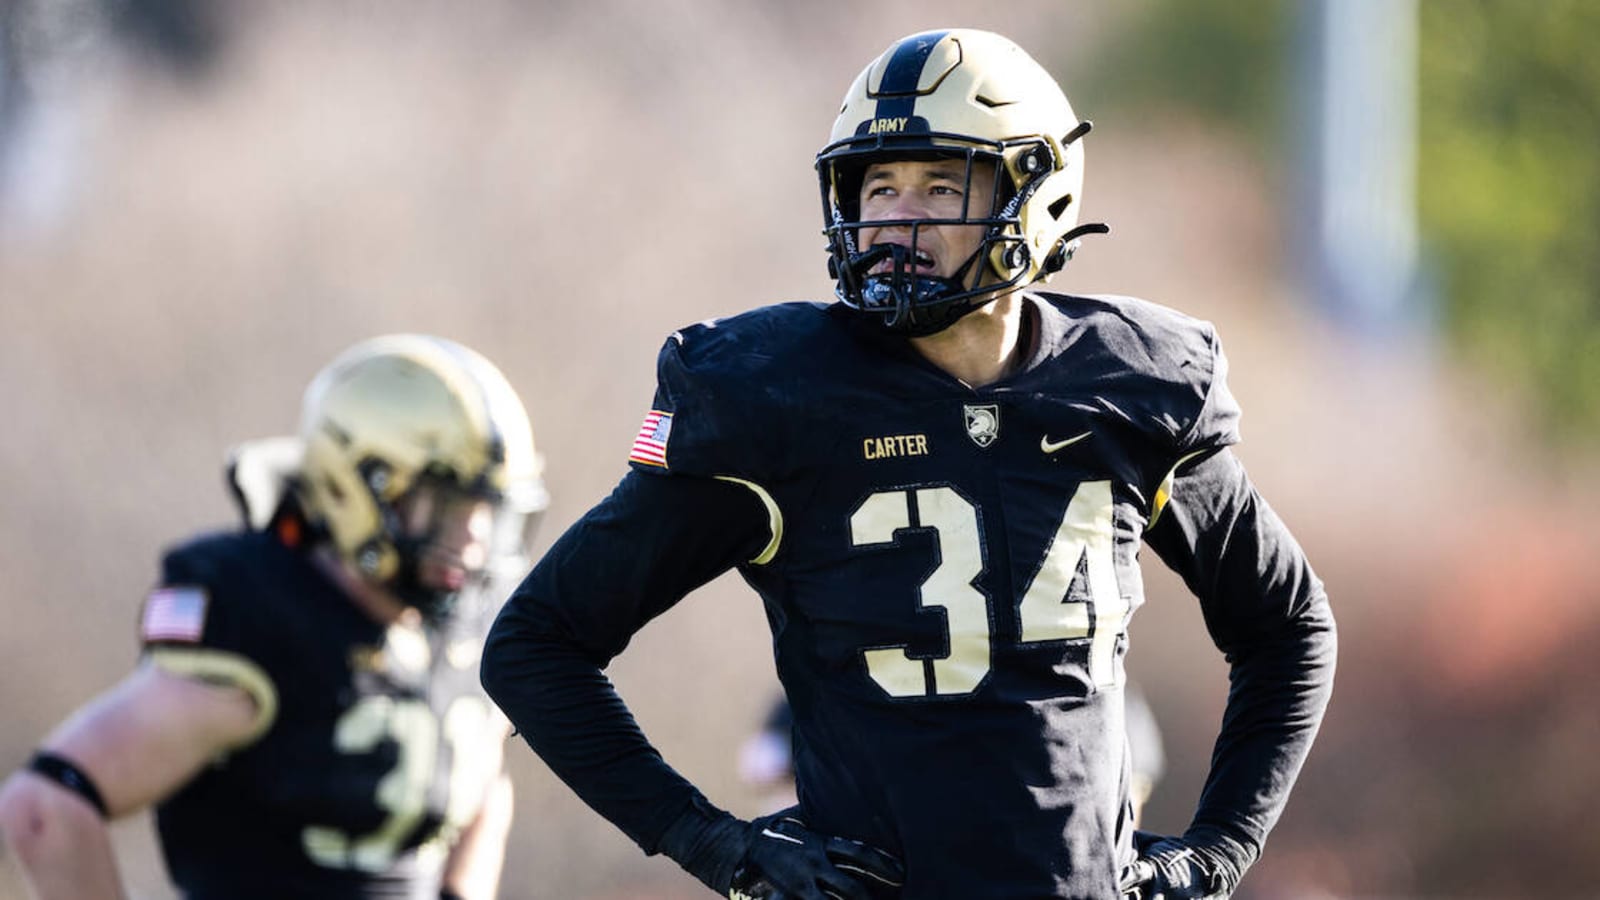 Minnesota Vikings sign Army EDGE Andre Carter II to UDFA deal with significant guarantees after 2023 NFL Draft